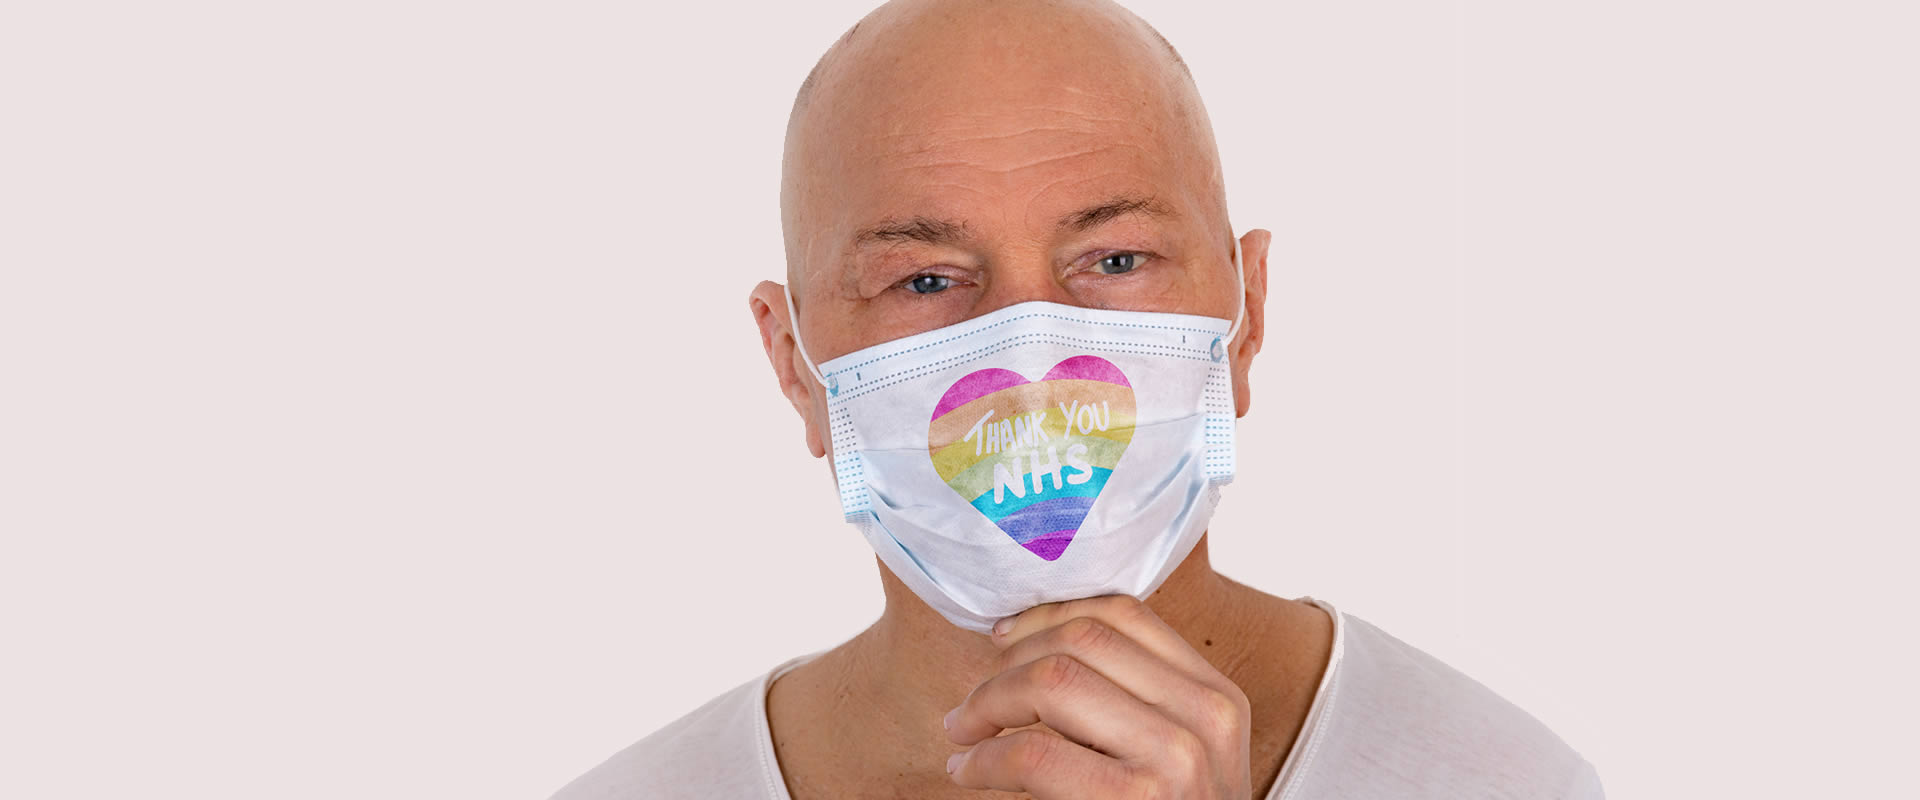 Man with an Artificial Eye wearing a Thank You NHS Mask